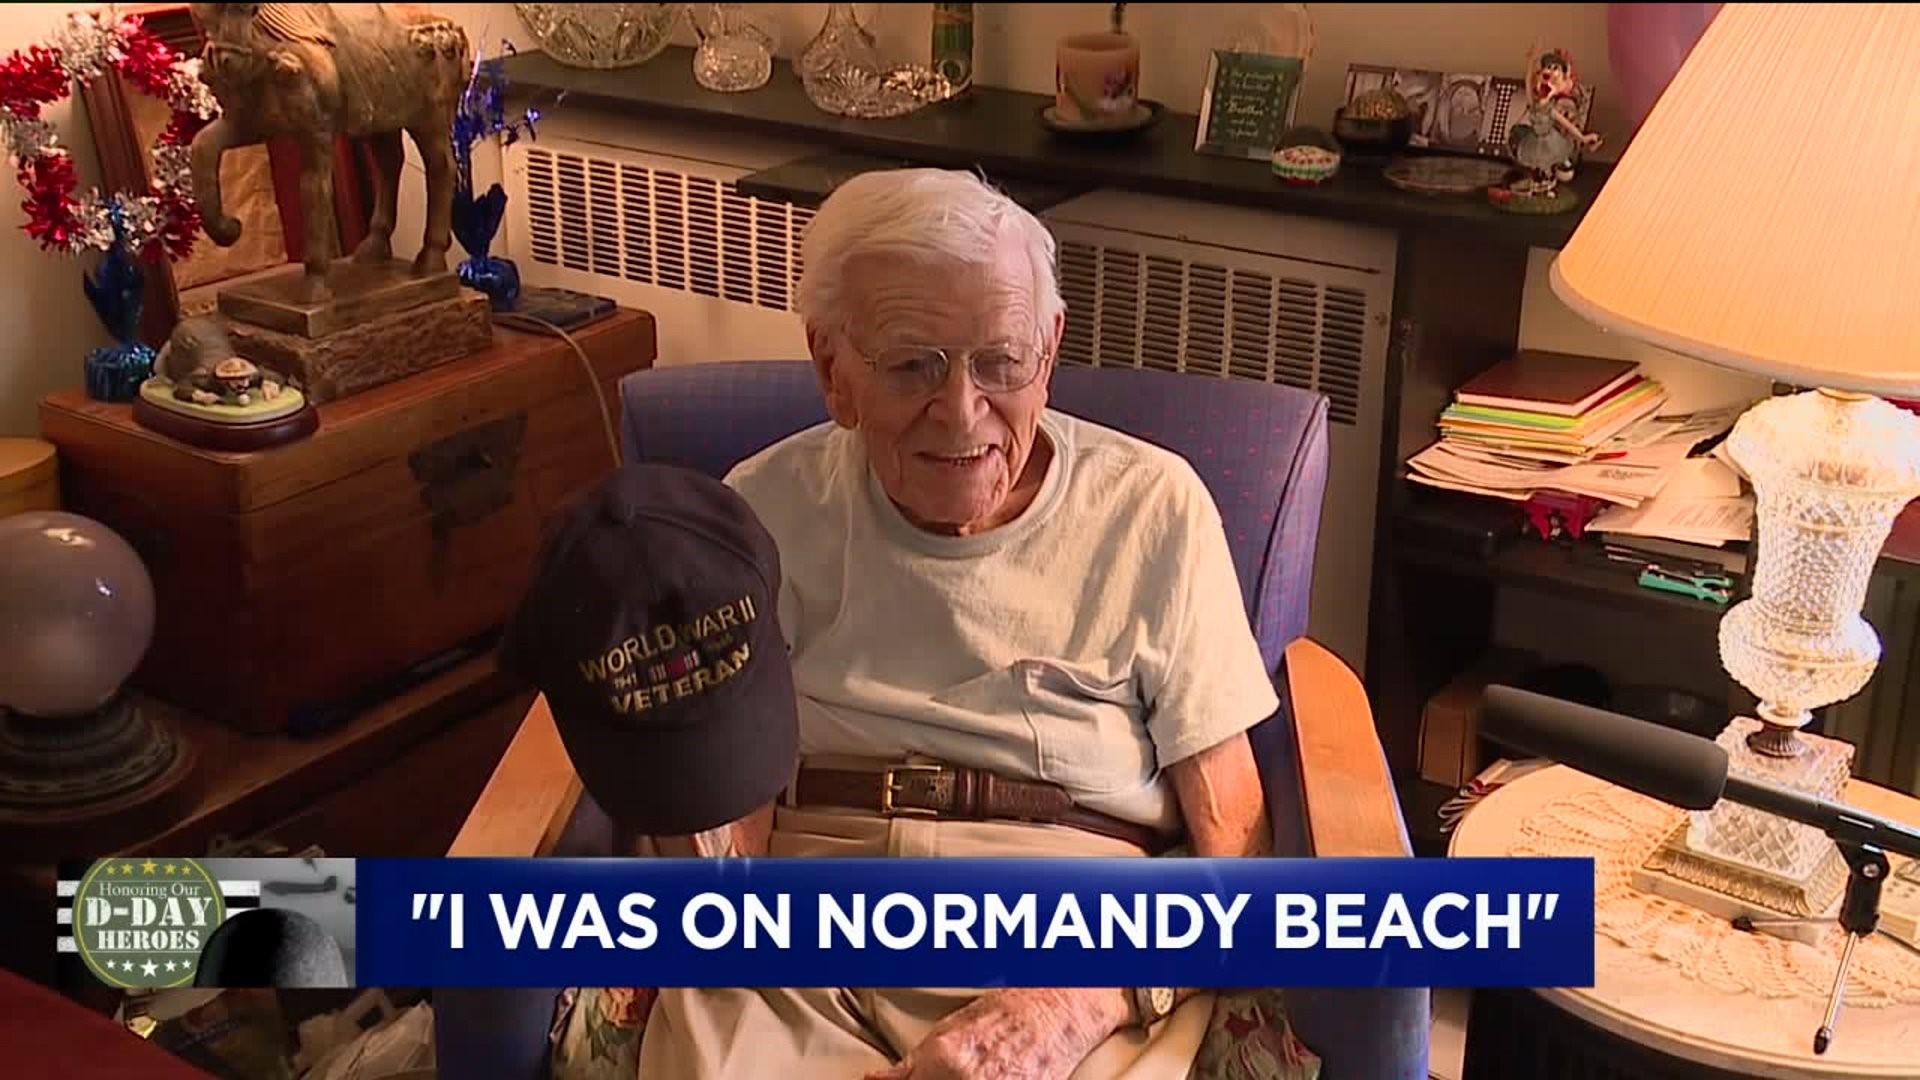 Luzerne County Veteran Shares Memories of Days Following D-Day Invasion